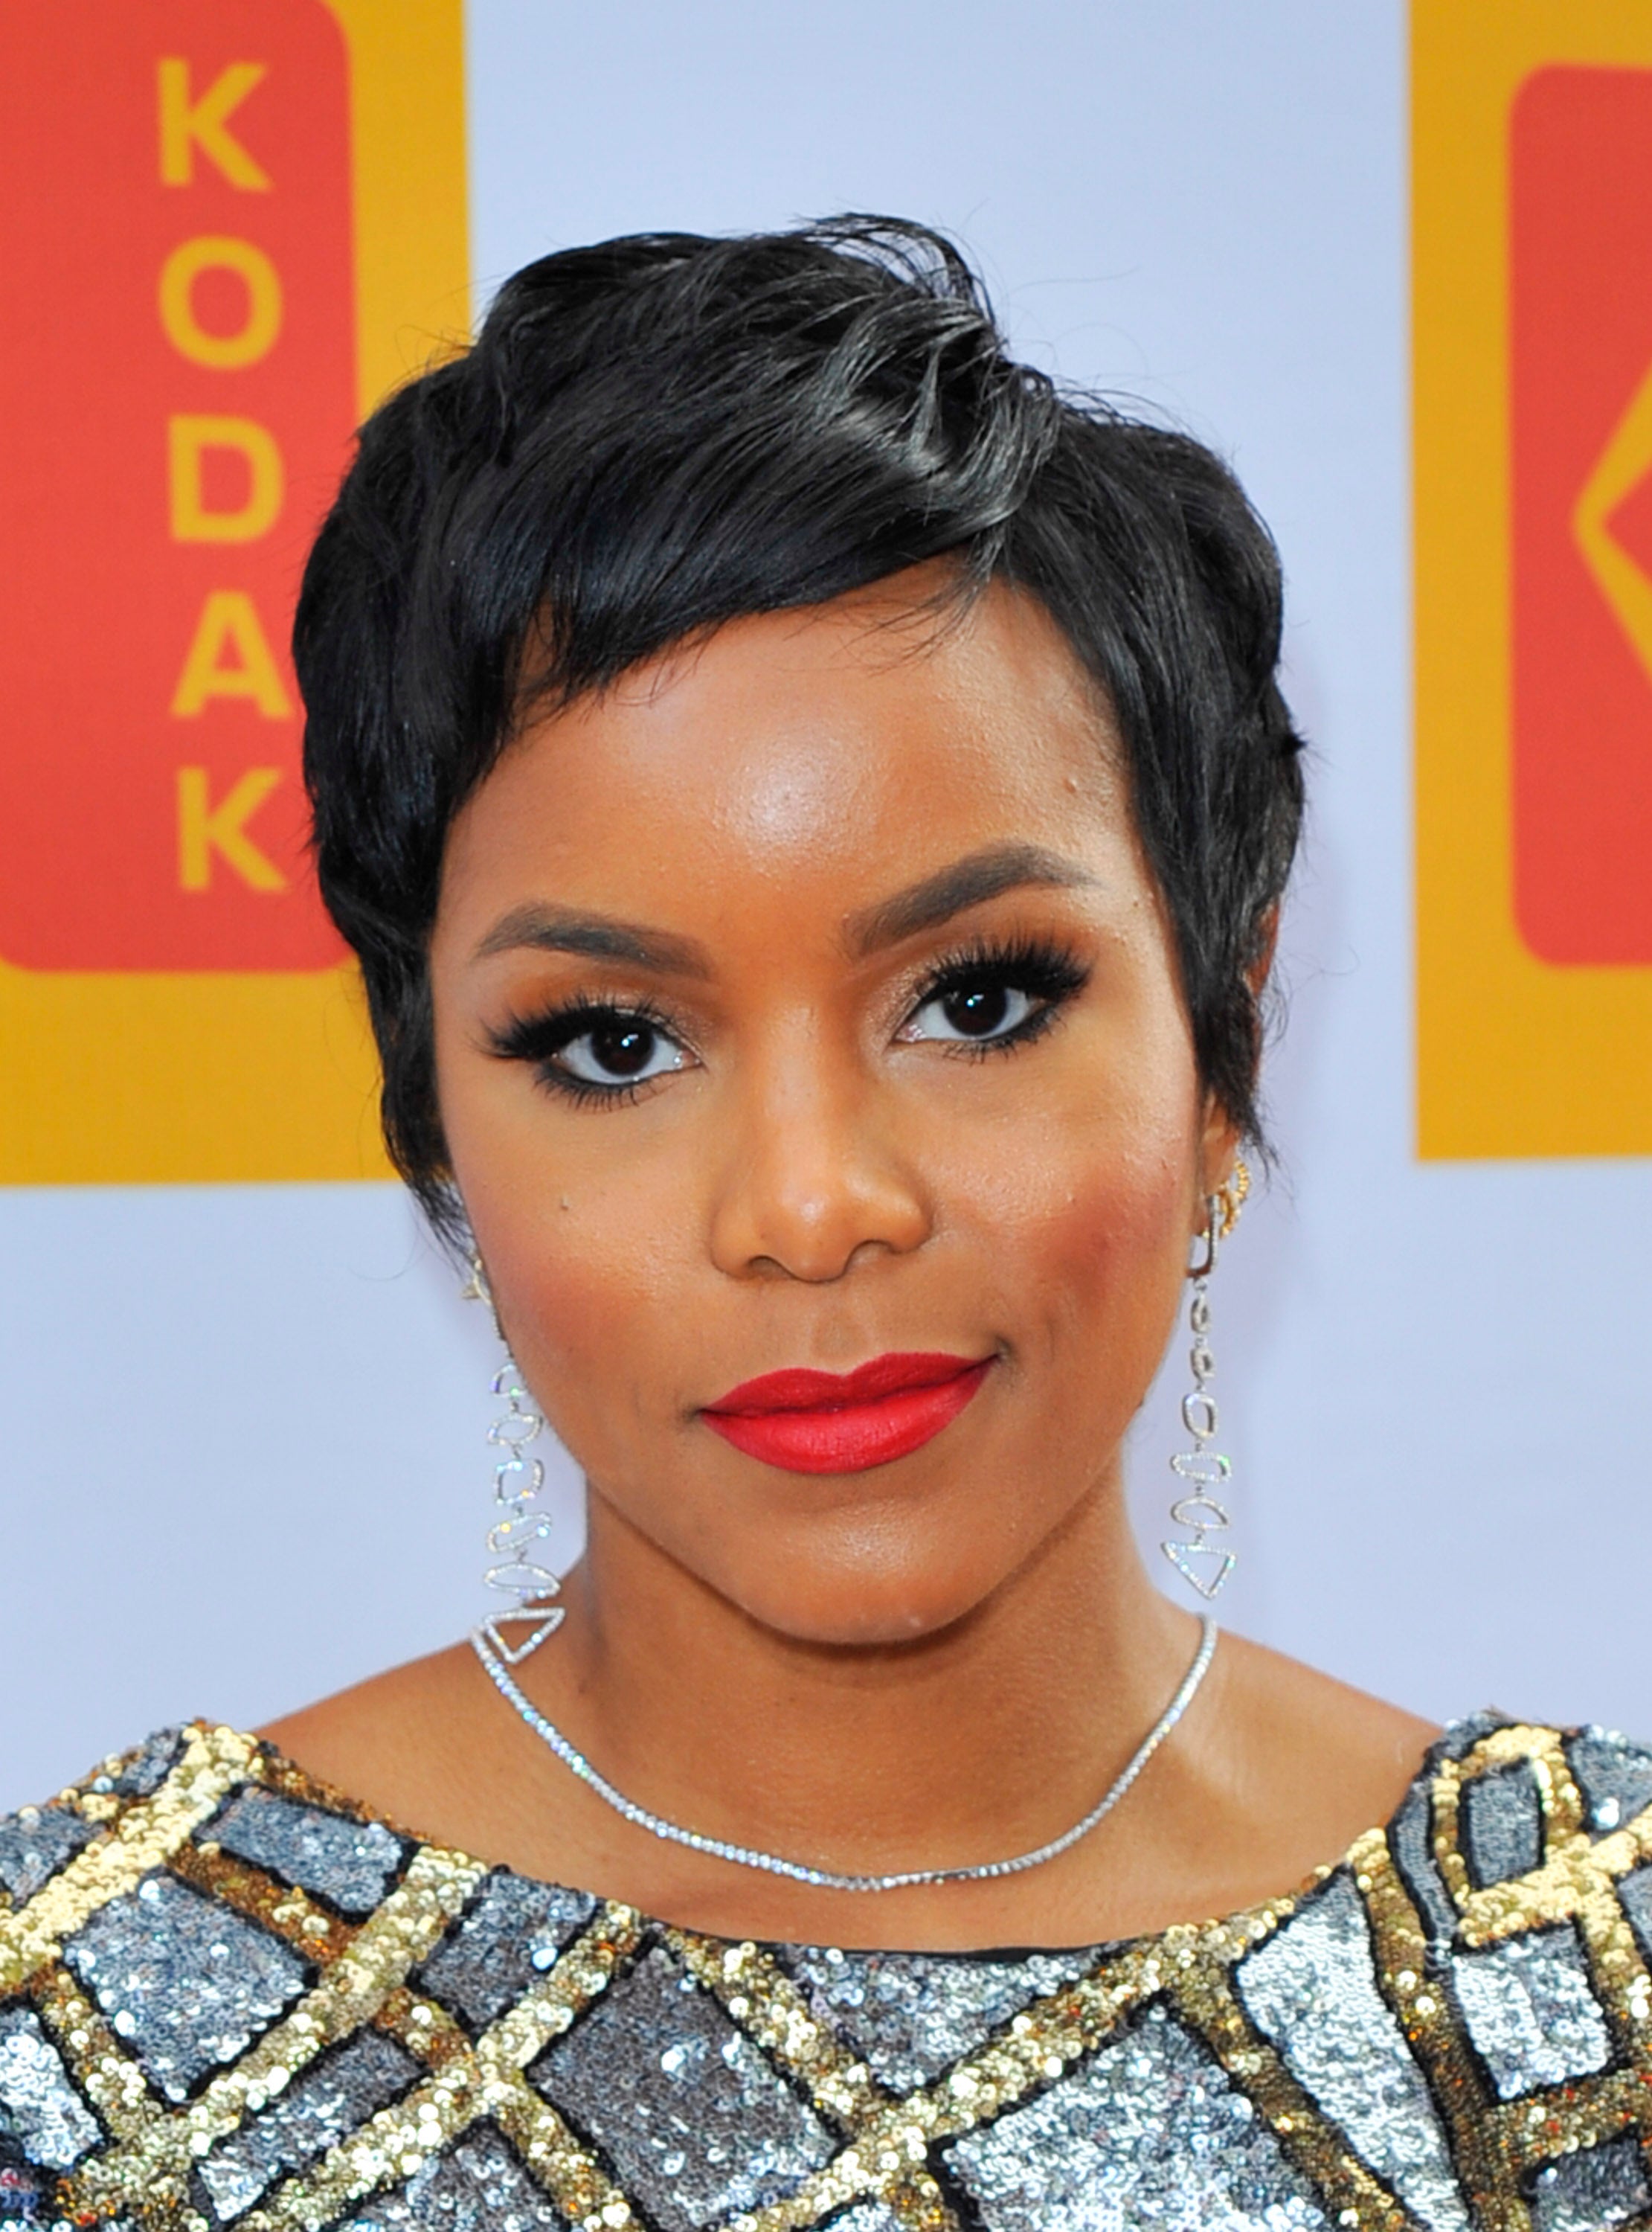 How To Wear Short Hair Like LeToya Luckett And Kill It Every Time
